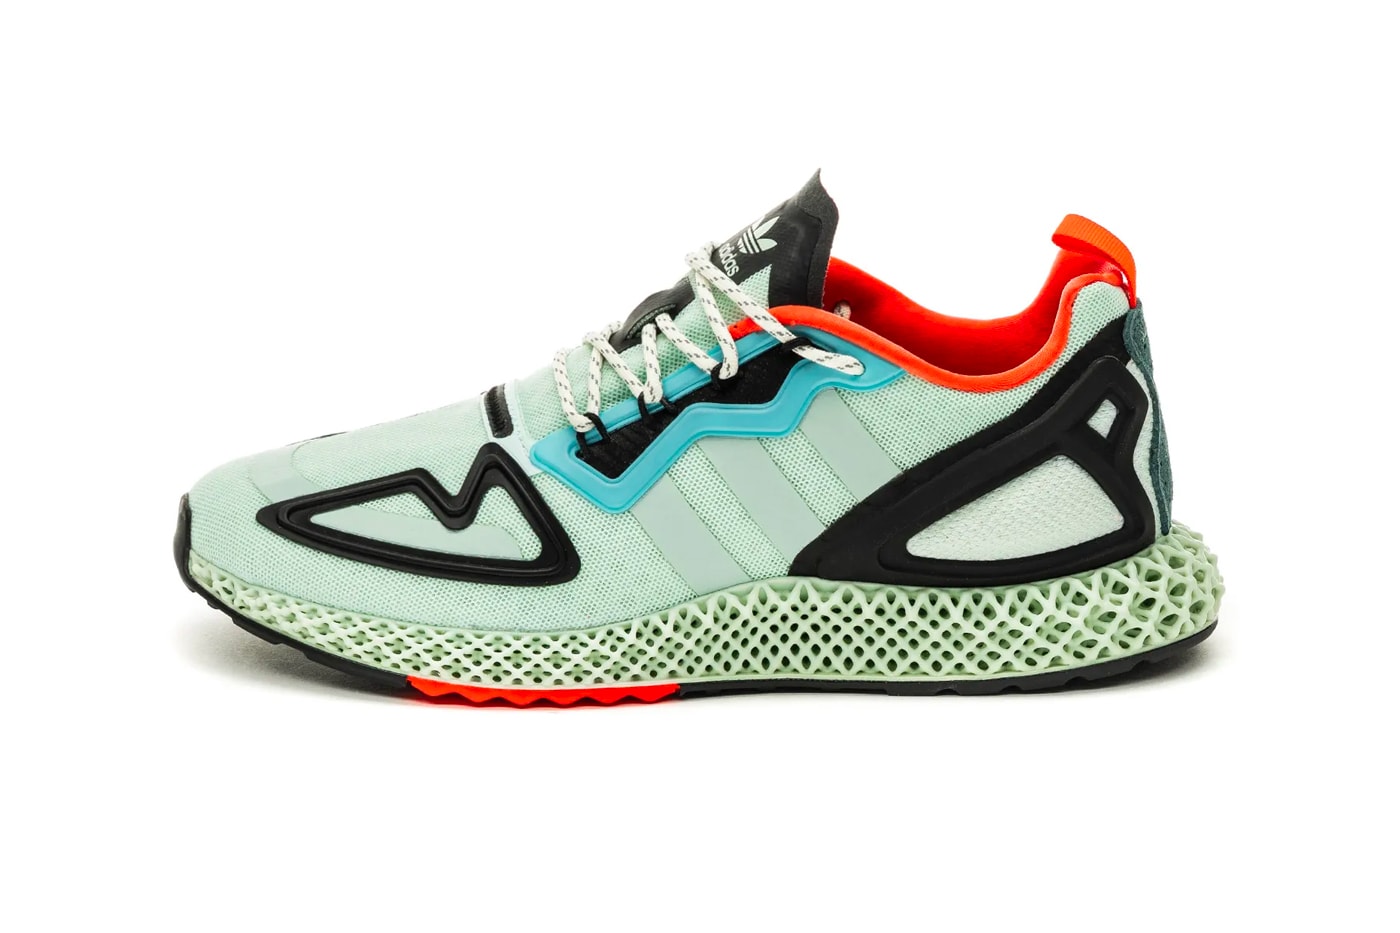 adidas ZX 2K 4D Dash Green FV8500 menswear streetwear spring summer 2020 collection footwear shoes sneakers runners trainers german sportswear lifestyle four dimensional printed midsole dash mint raw FV8500